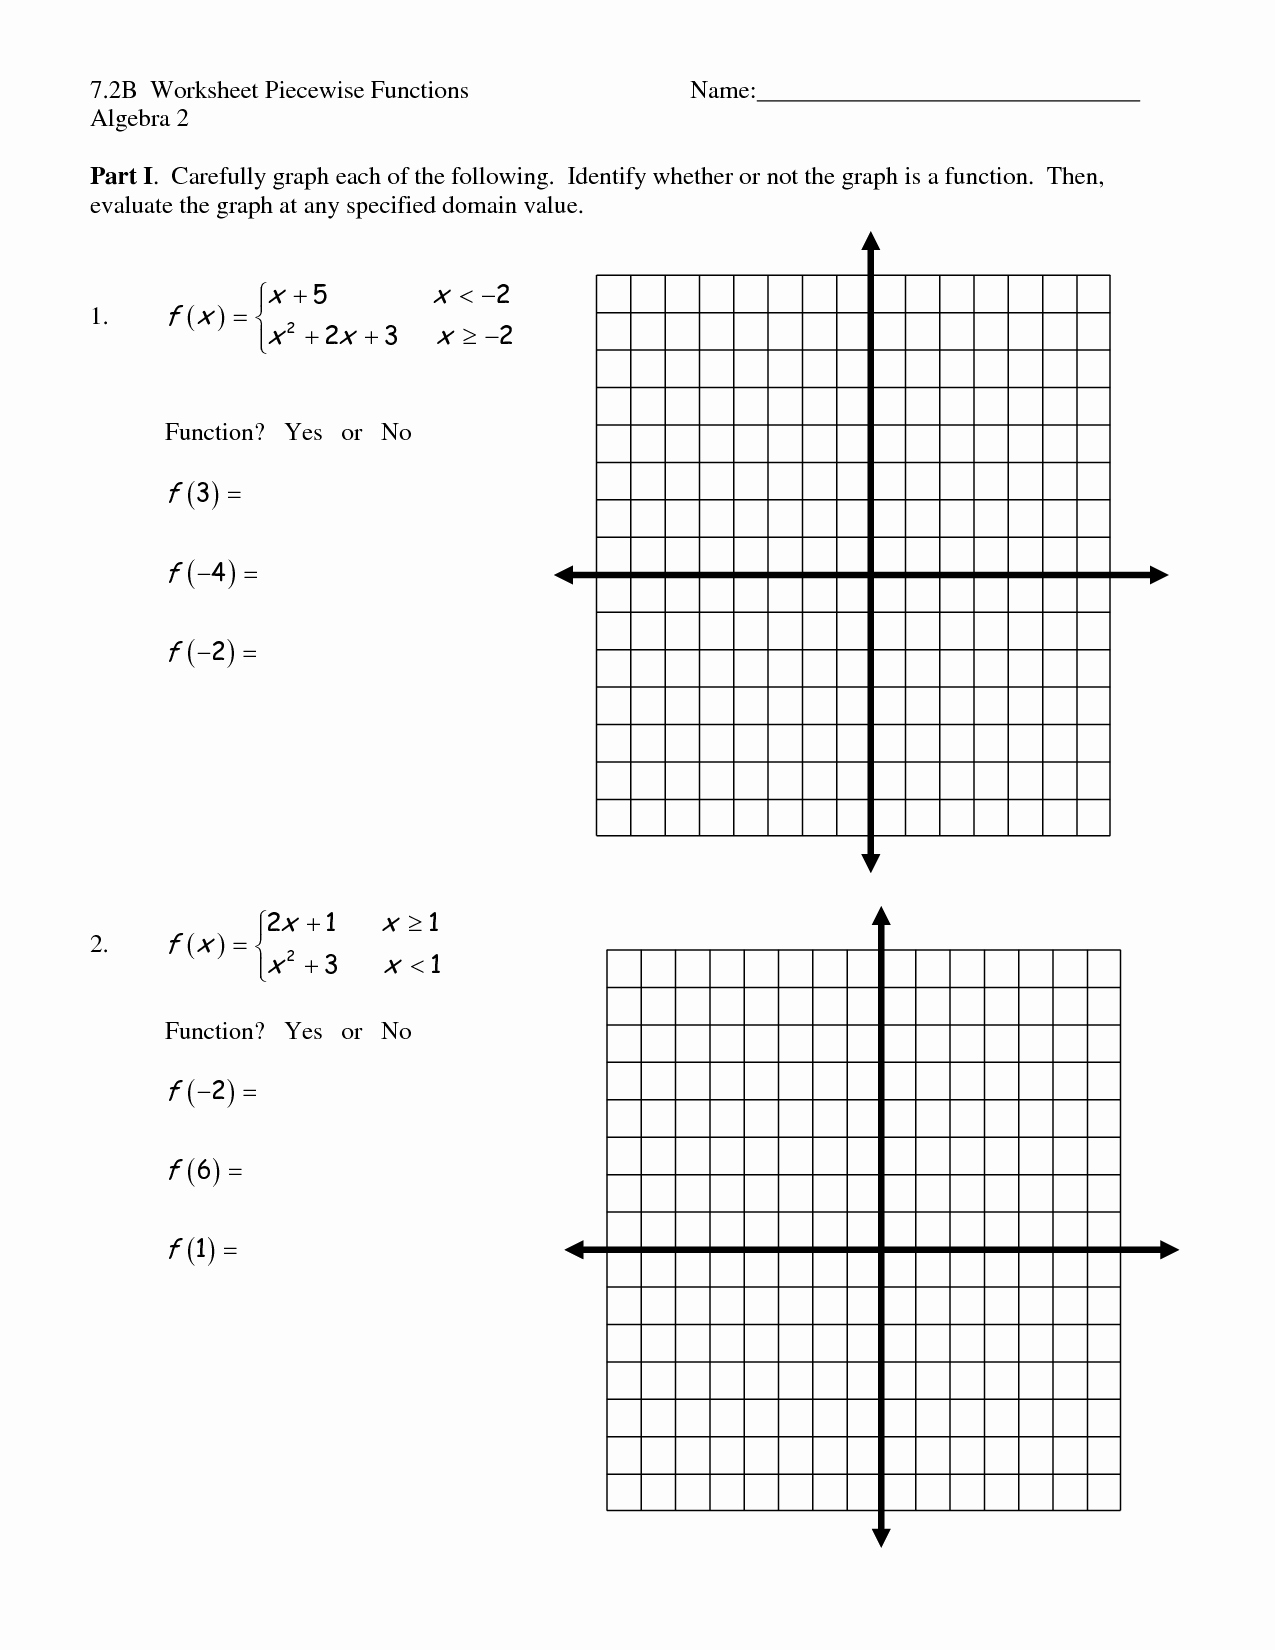 Worksheet Piecewise Functions Answer Key Awesome 17 Best Of Graph Functions Worksheets Algebra